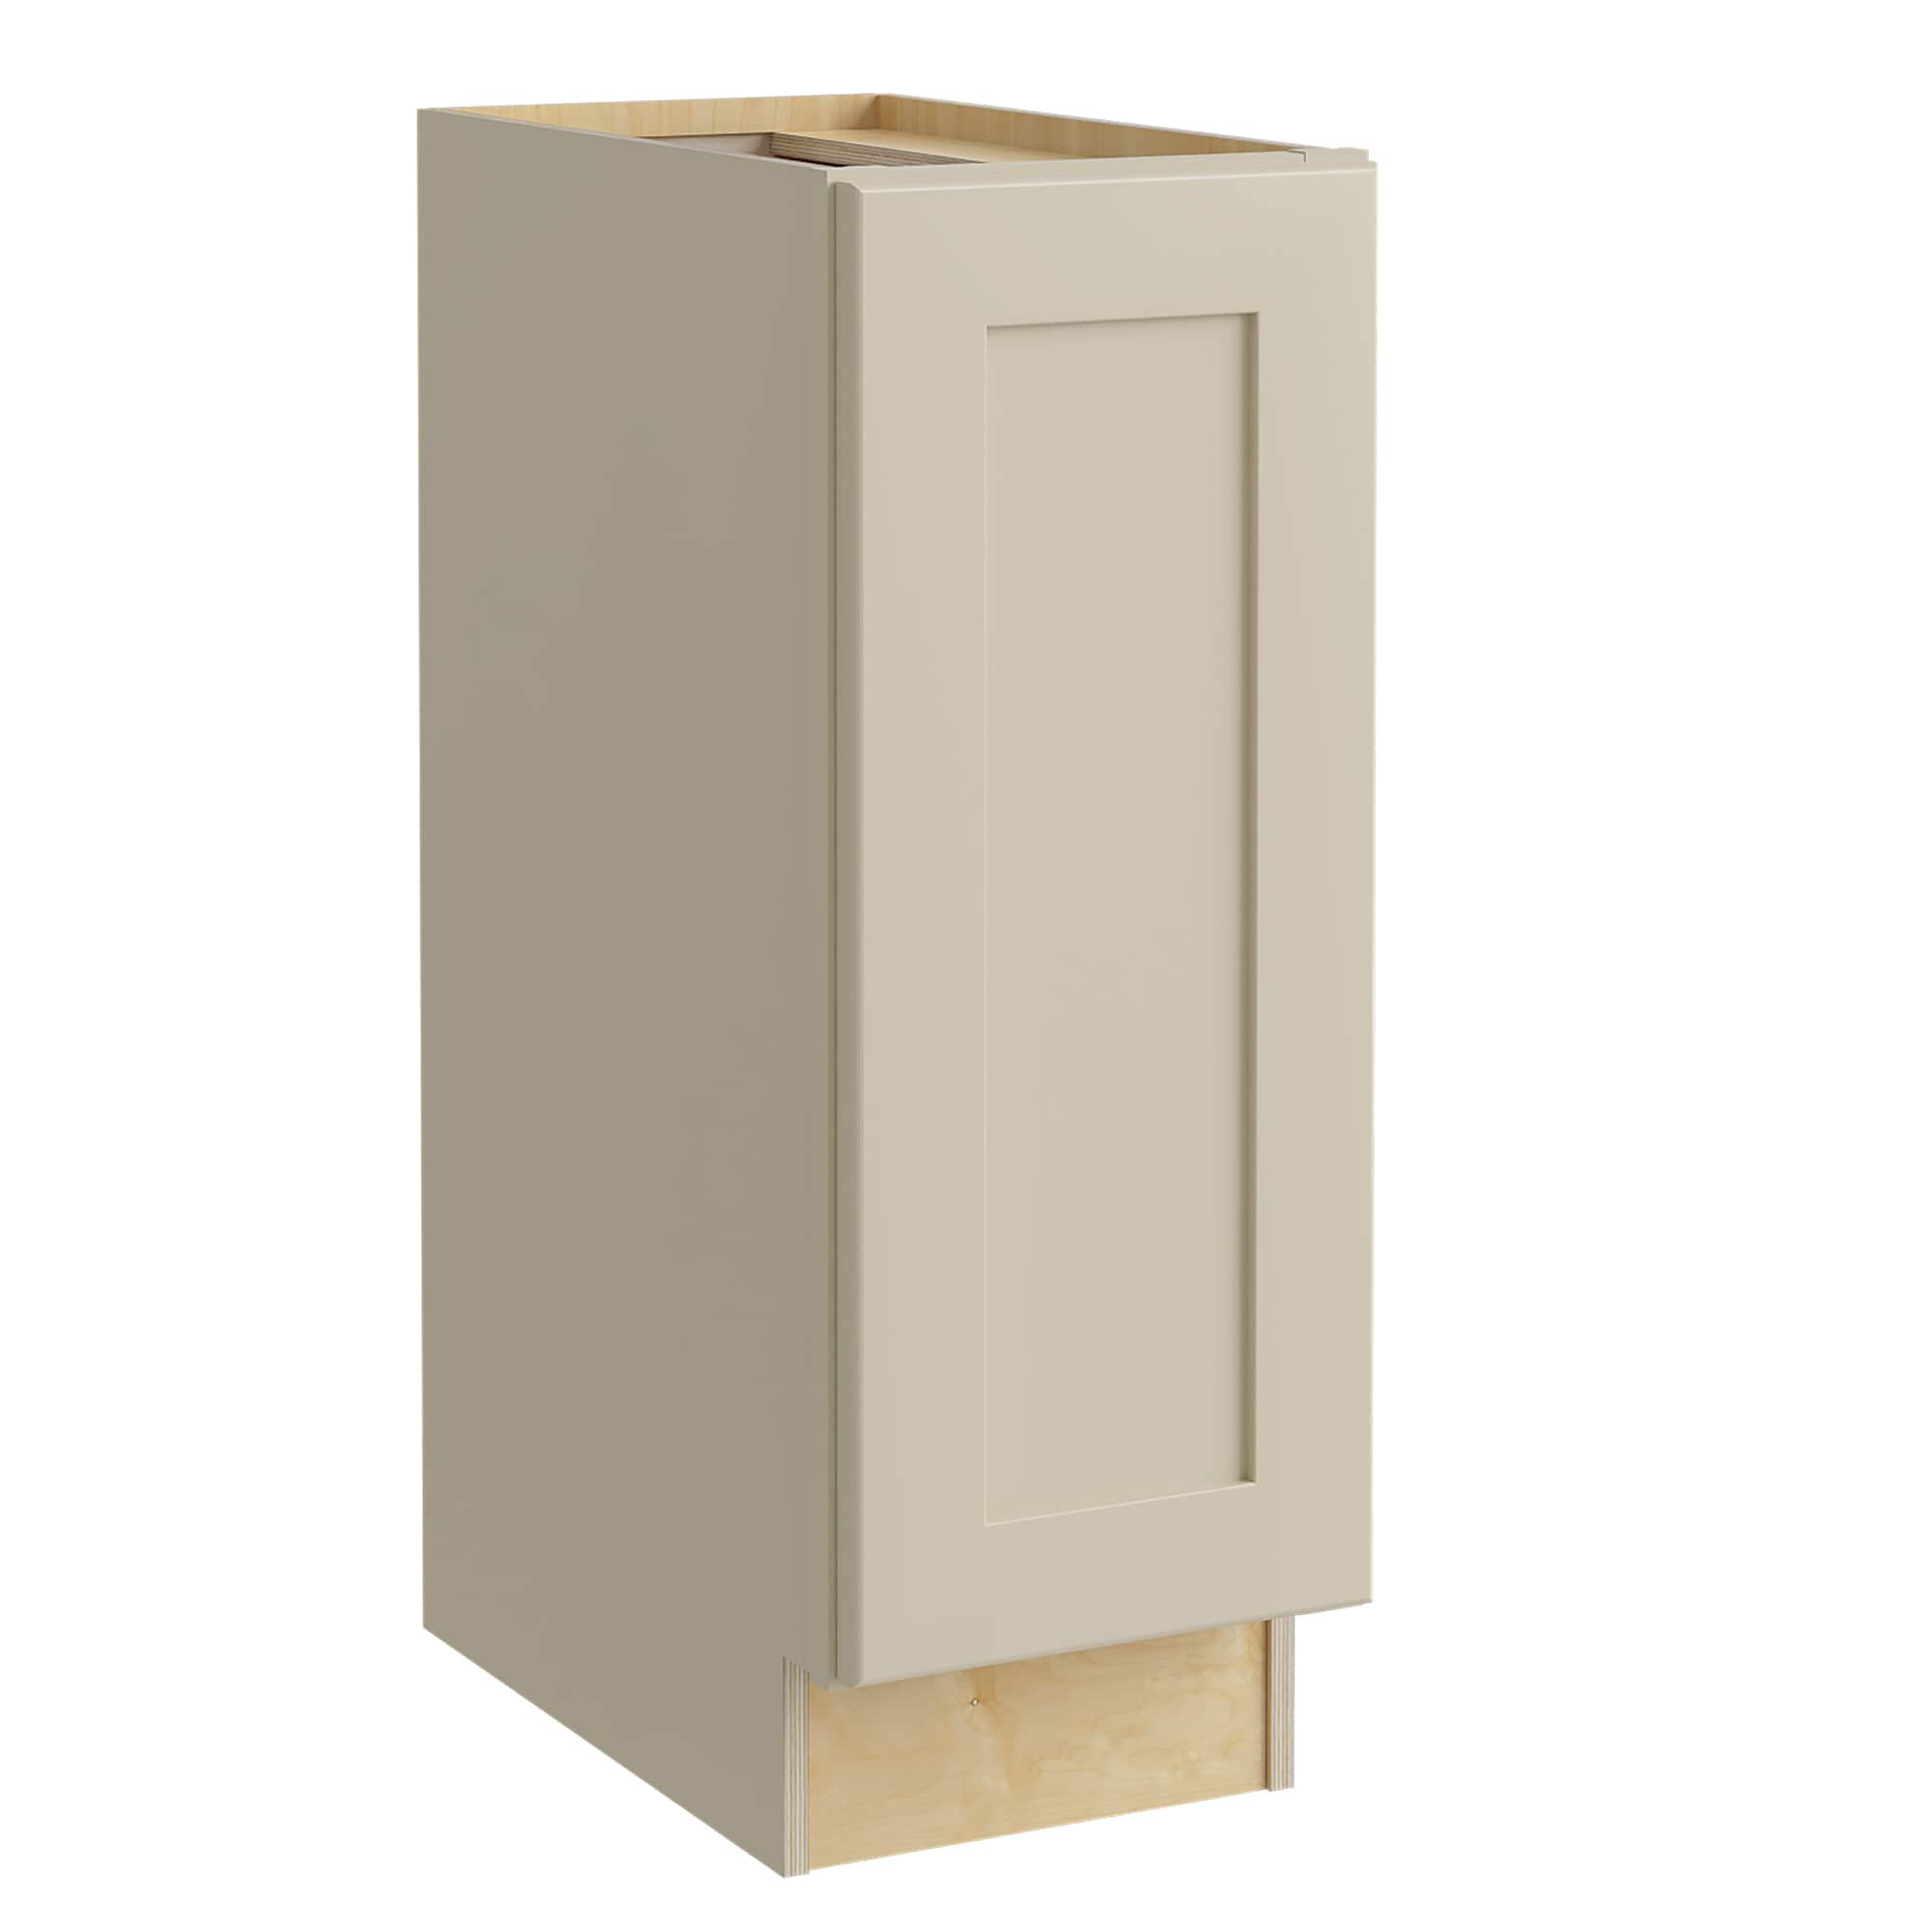 Luxxe Cabinetry 12-in W x 34.5-in H x 21-in D Norfolk Blended Cream Painted Door Base Fully Assembled Semi-custom Cabinet in Off-White | VB1221FHL-NBC